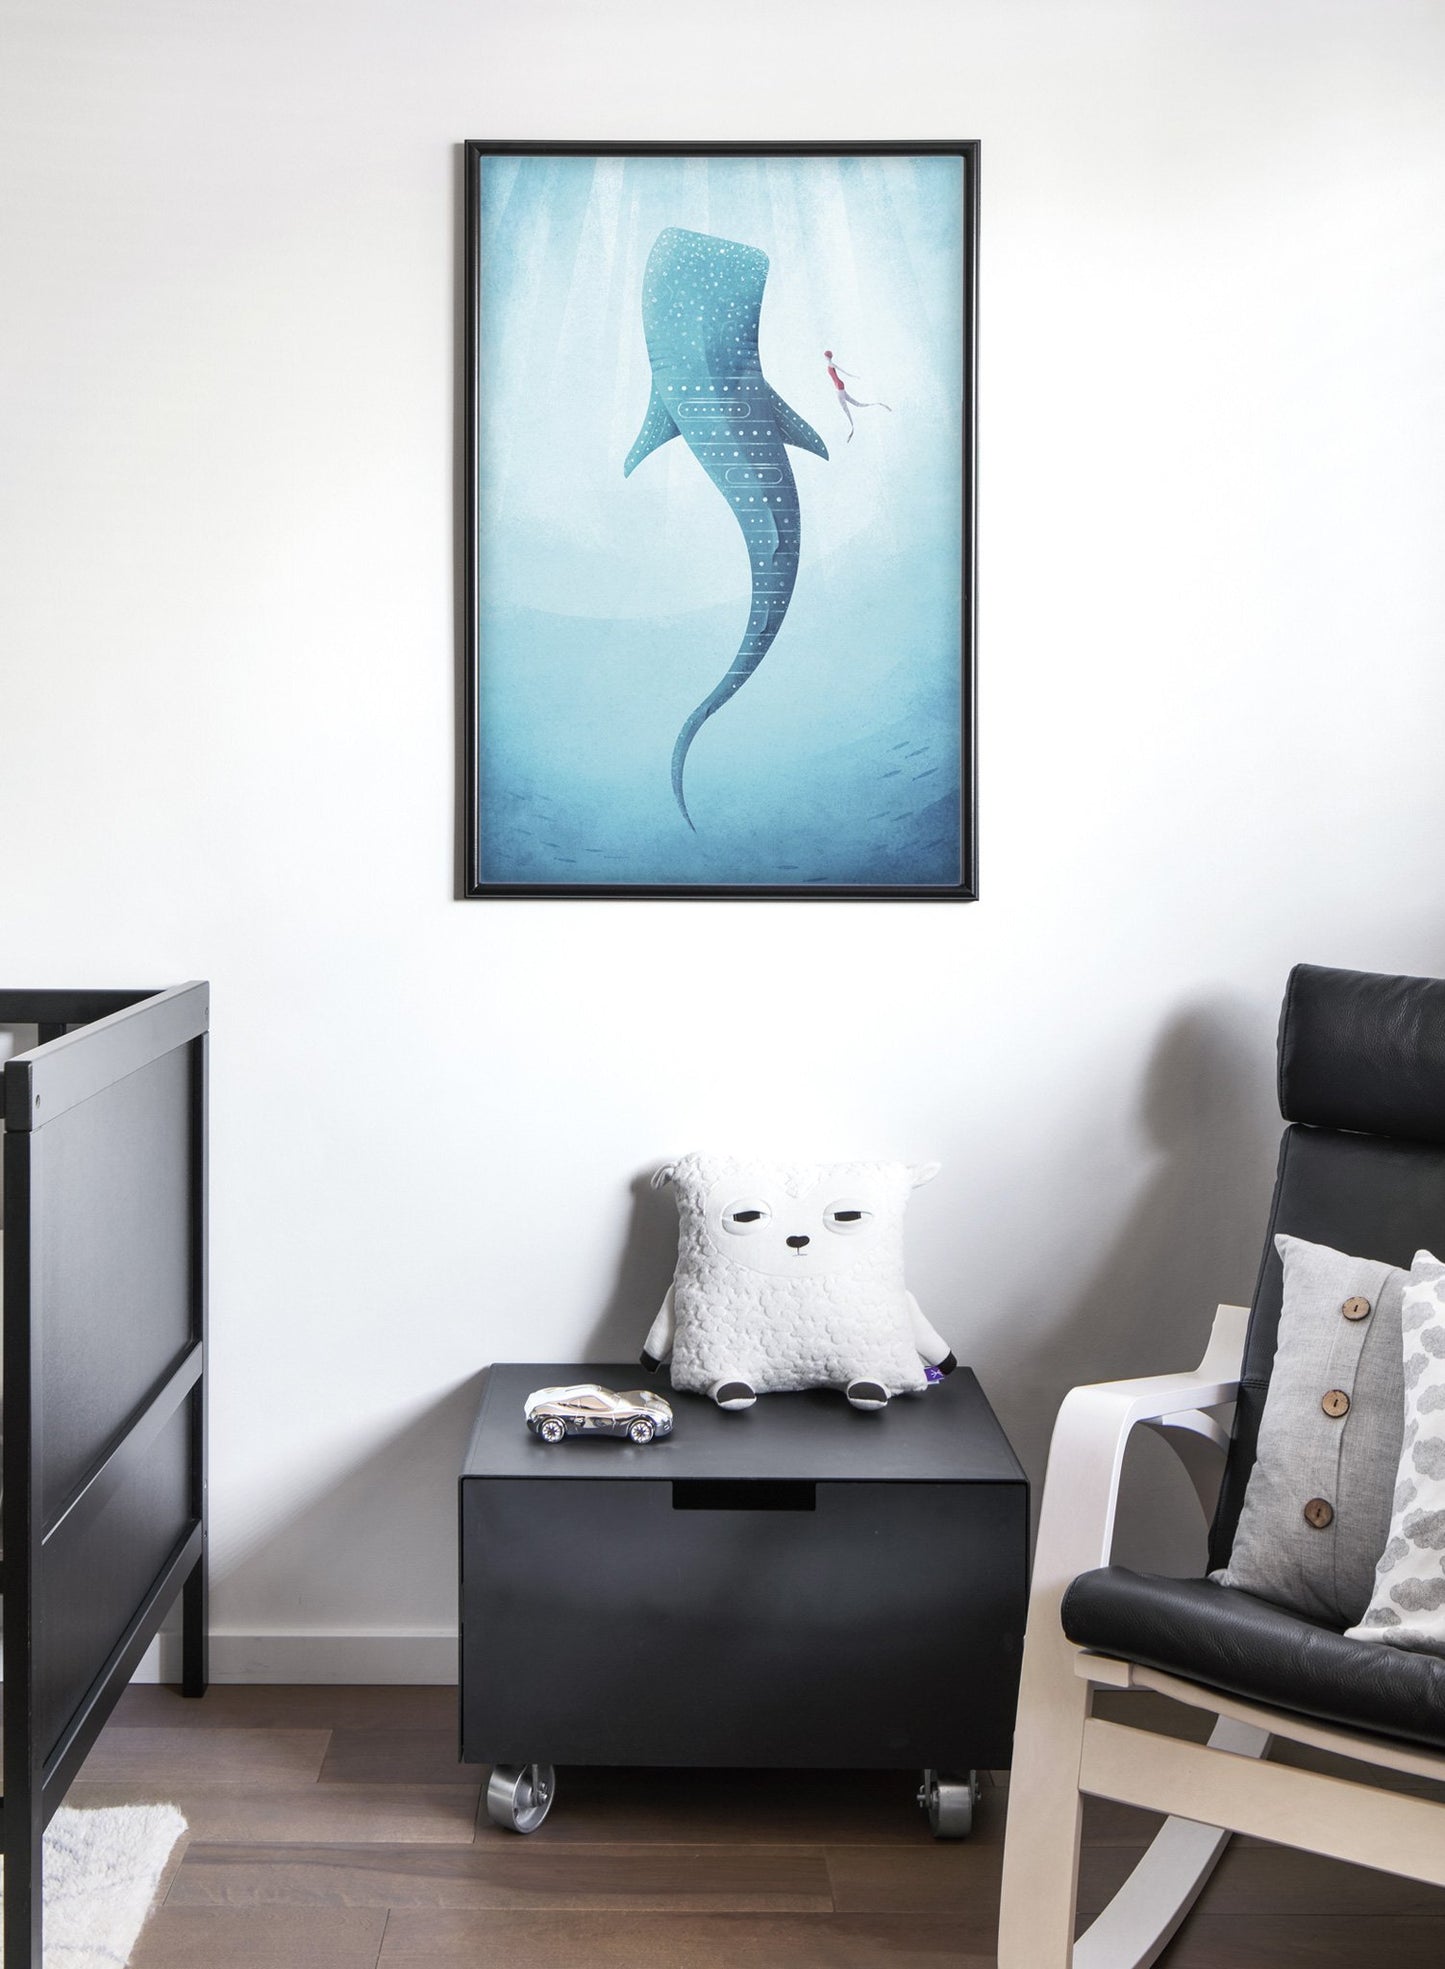 Modern minimalist poster by Opposite Wall with illustration of whale in deep sea - Nursery